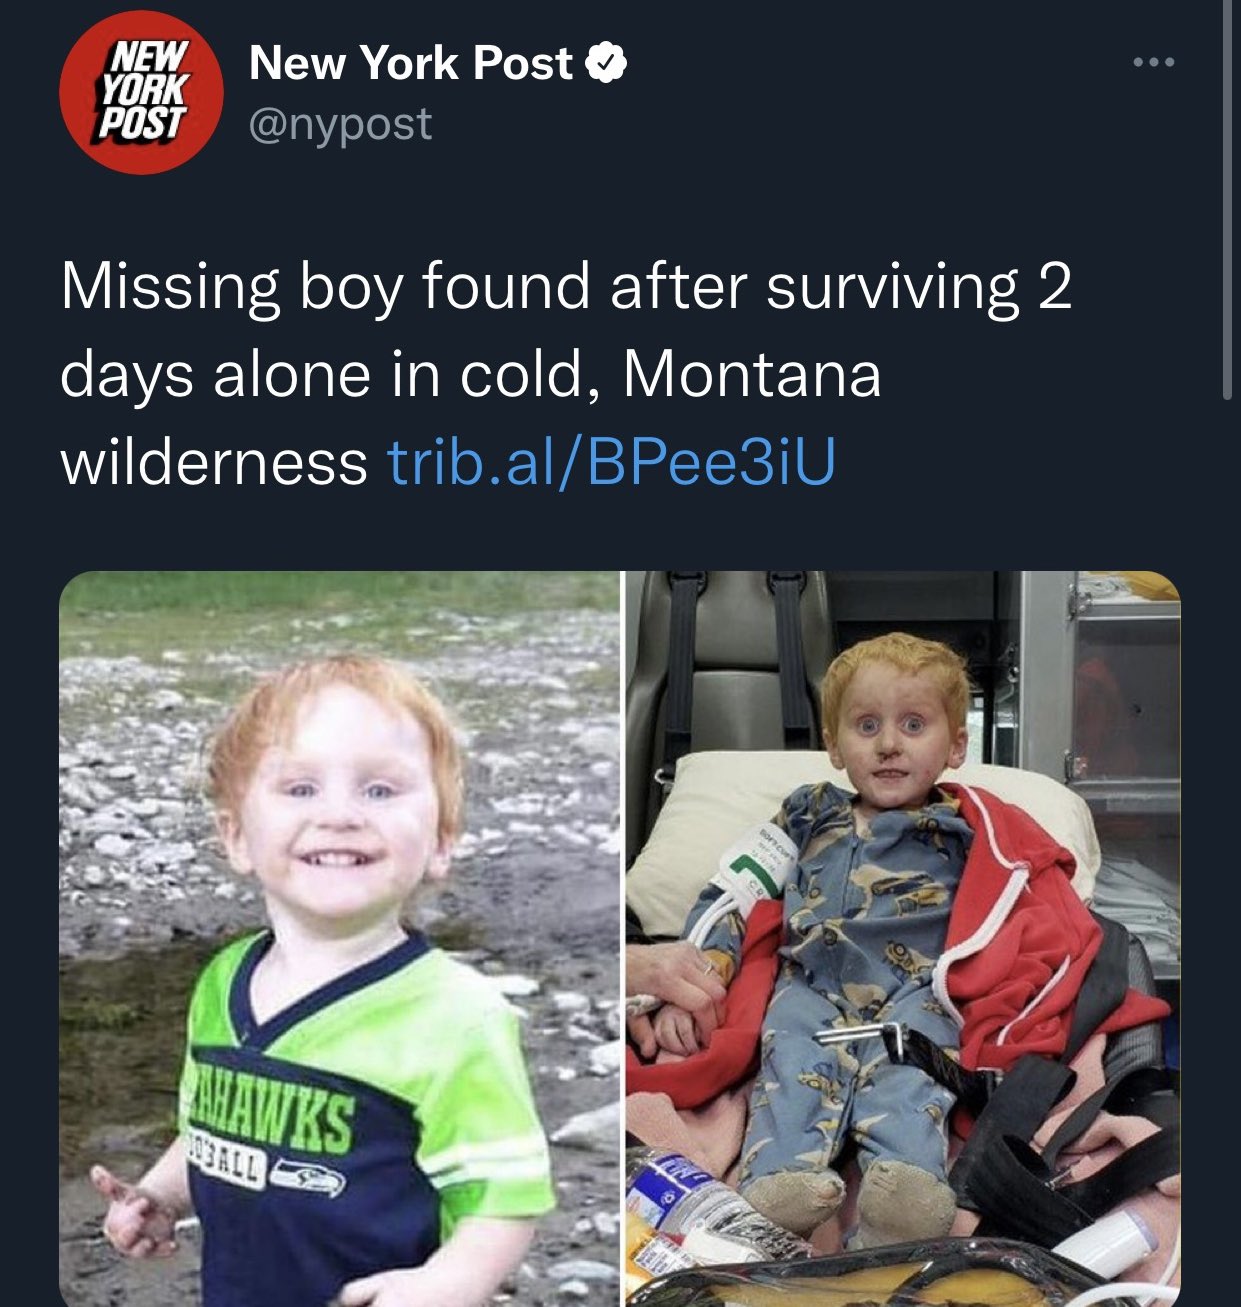 dudes posting their Ws - toddler - New New York Post York Post Missing boy found after surviving 2 days alone in cold, Montana wilderness trib.alBPee3iU Ahawks Ball sort curs www. ...